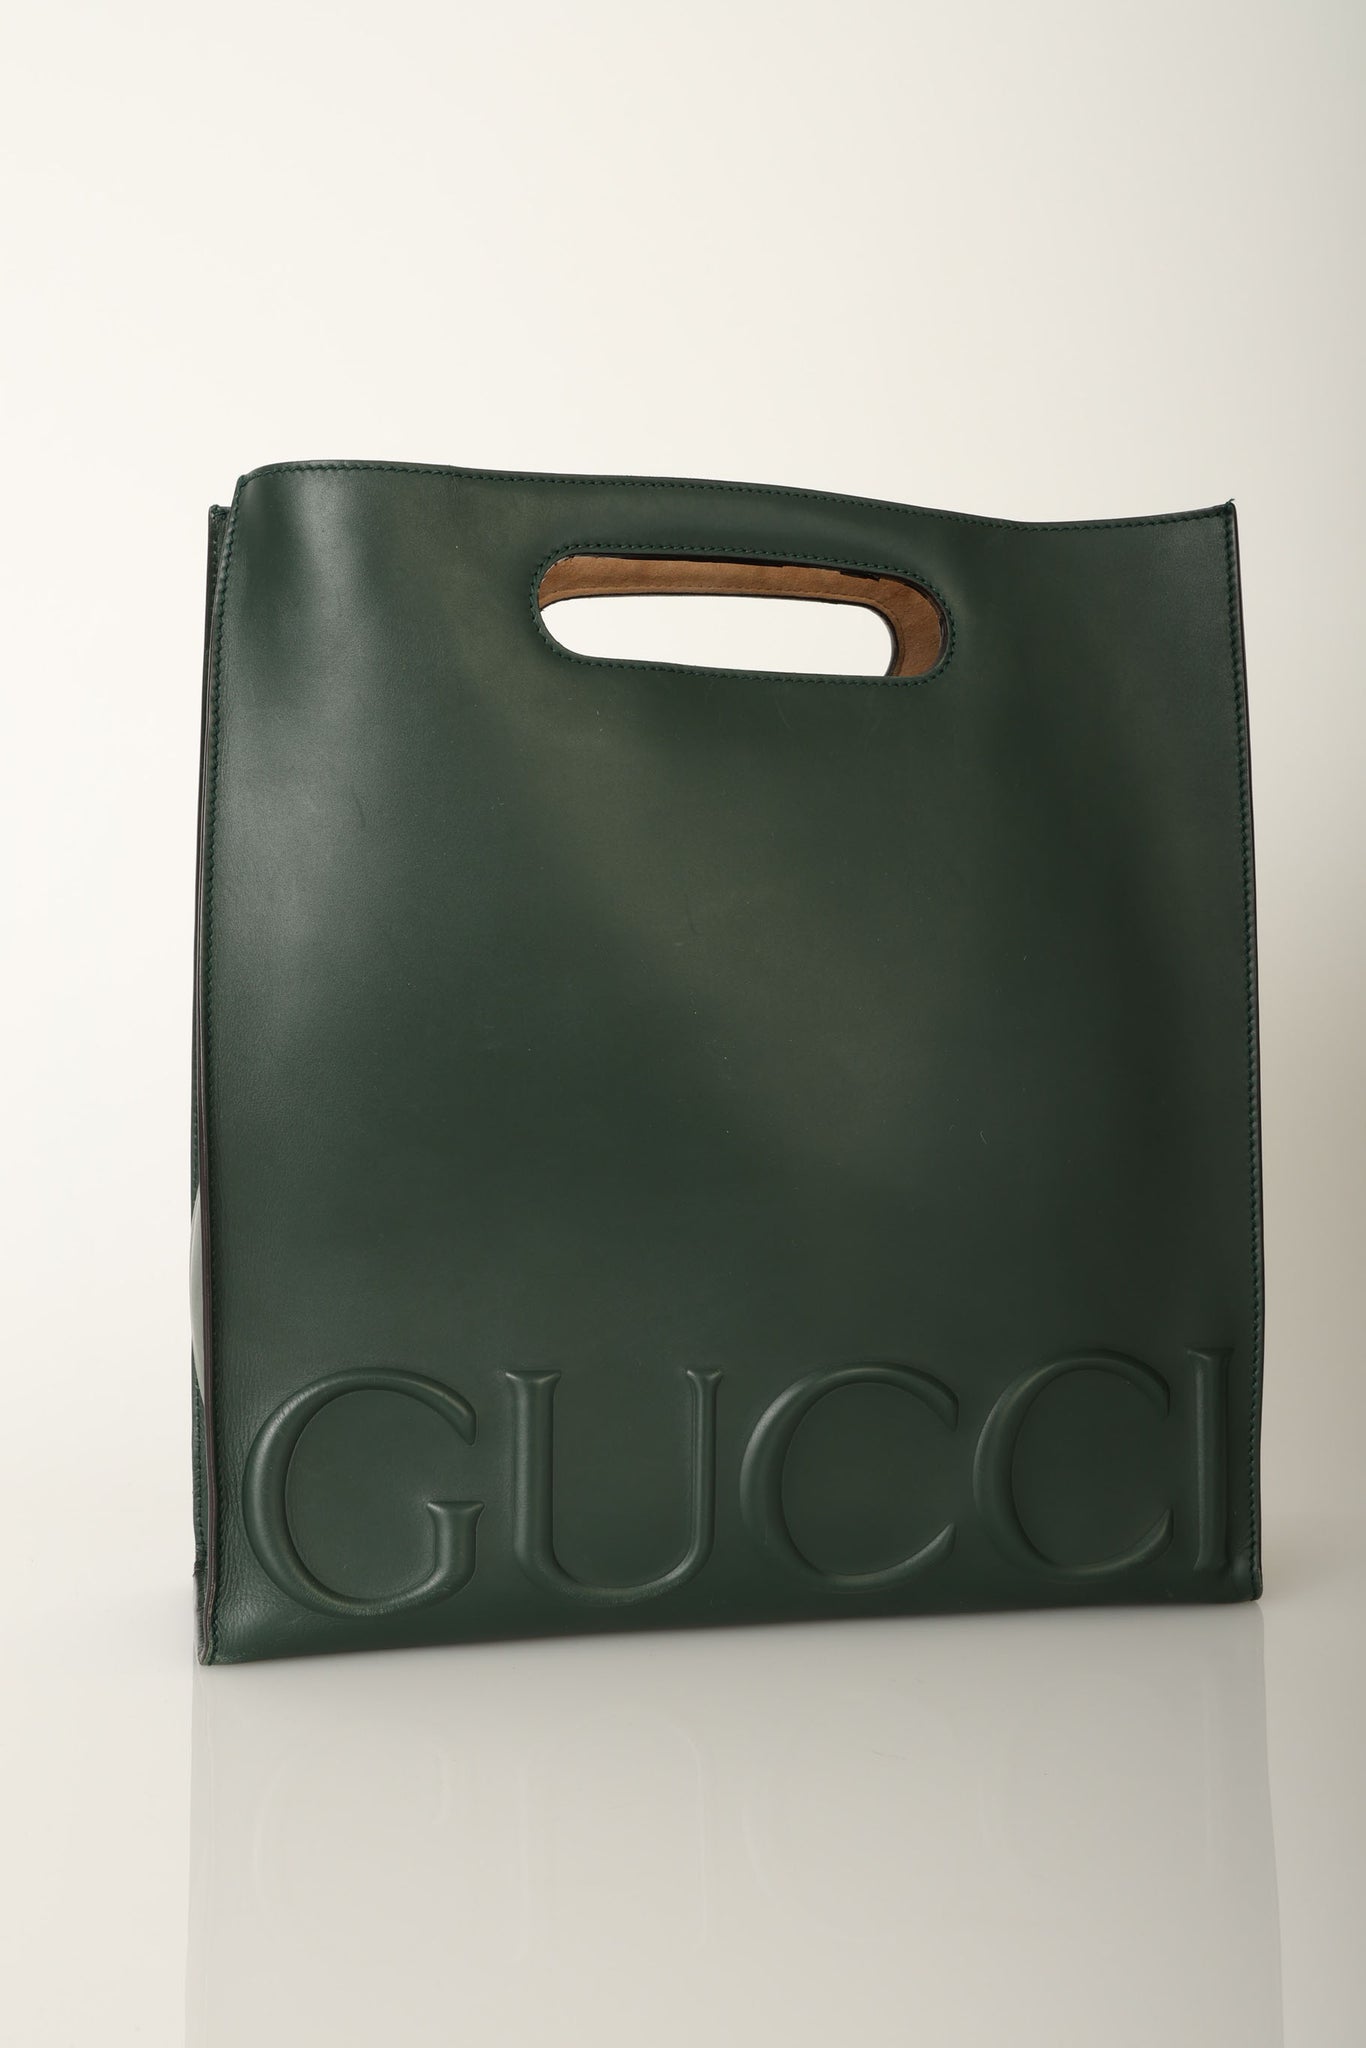 Gucci Embossed Leather Shopper Tote